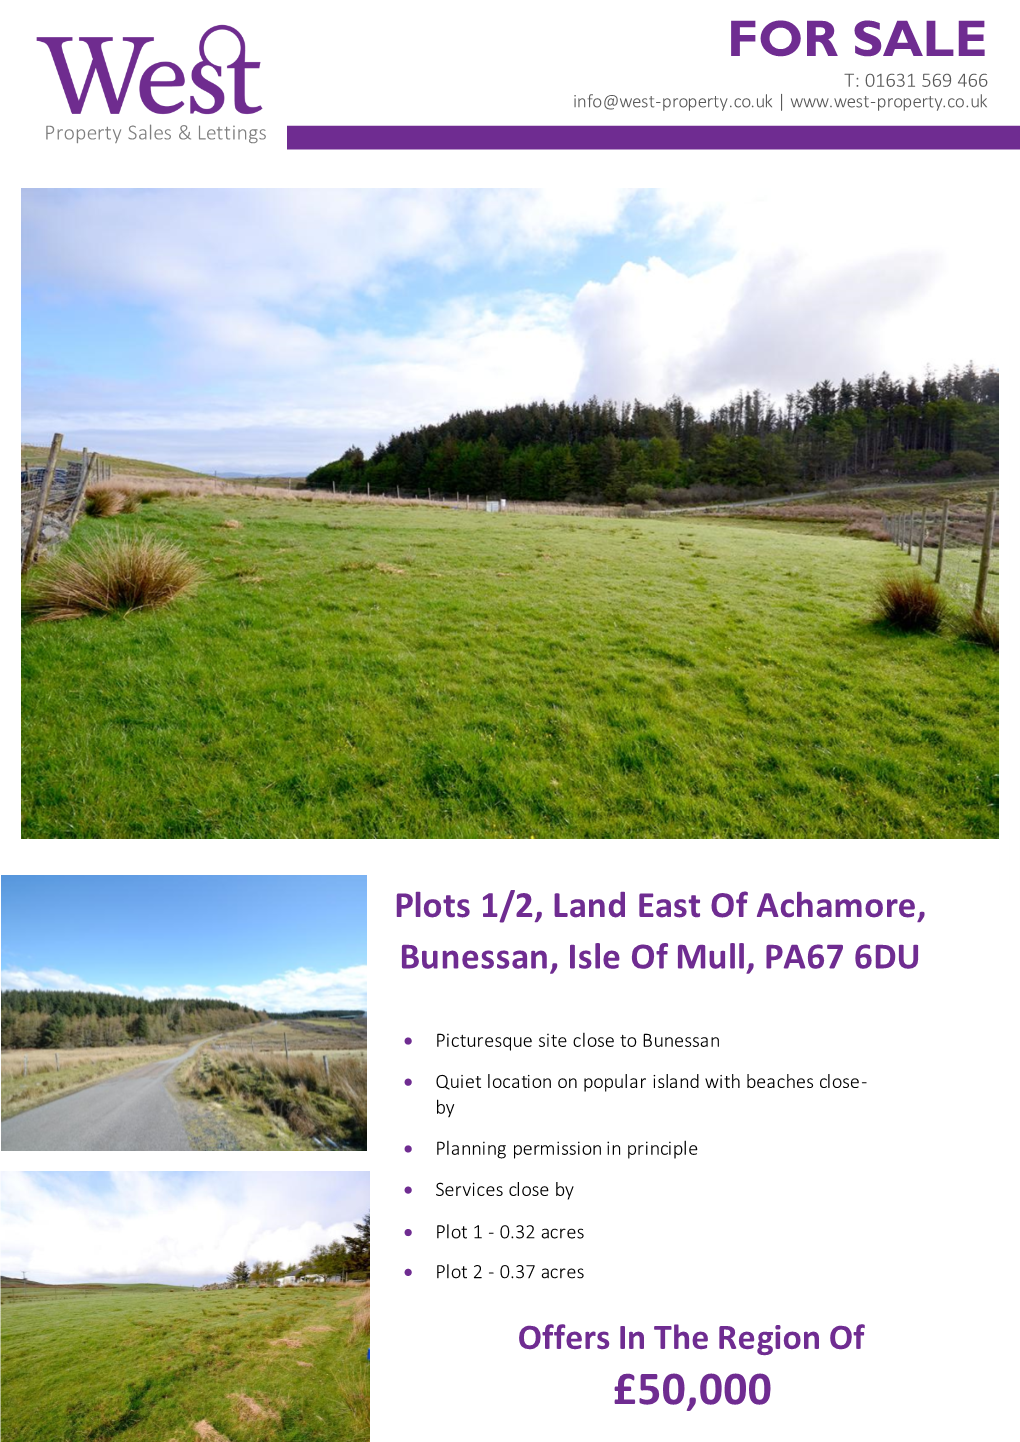 FOR SALE T: 01631 569 466 Info@West-Property.Co.Uk | Property Sales & Lettings